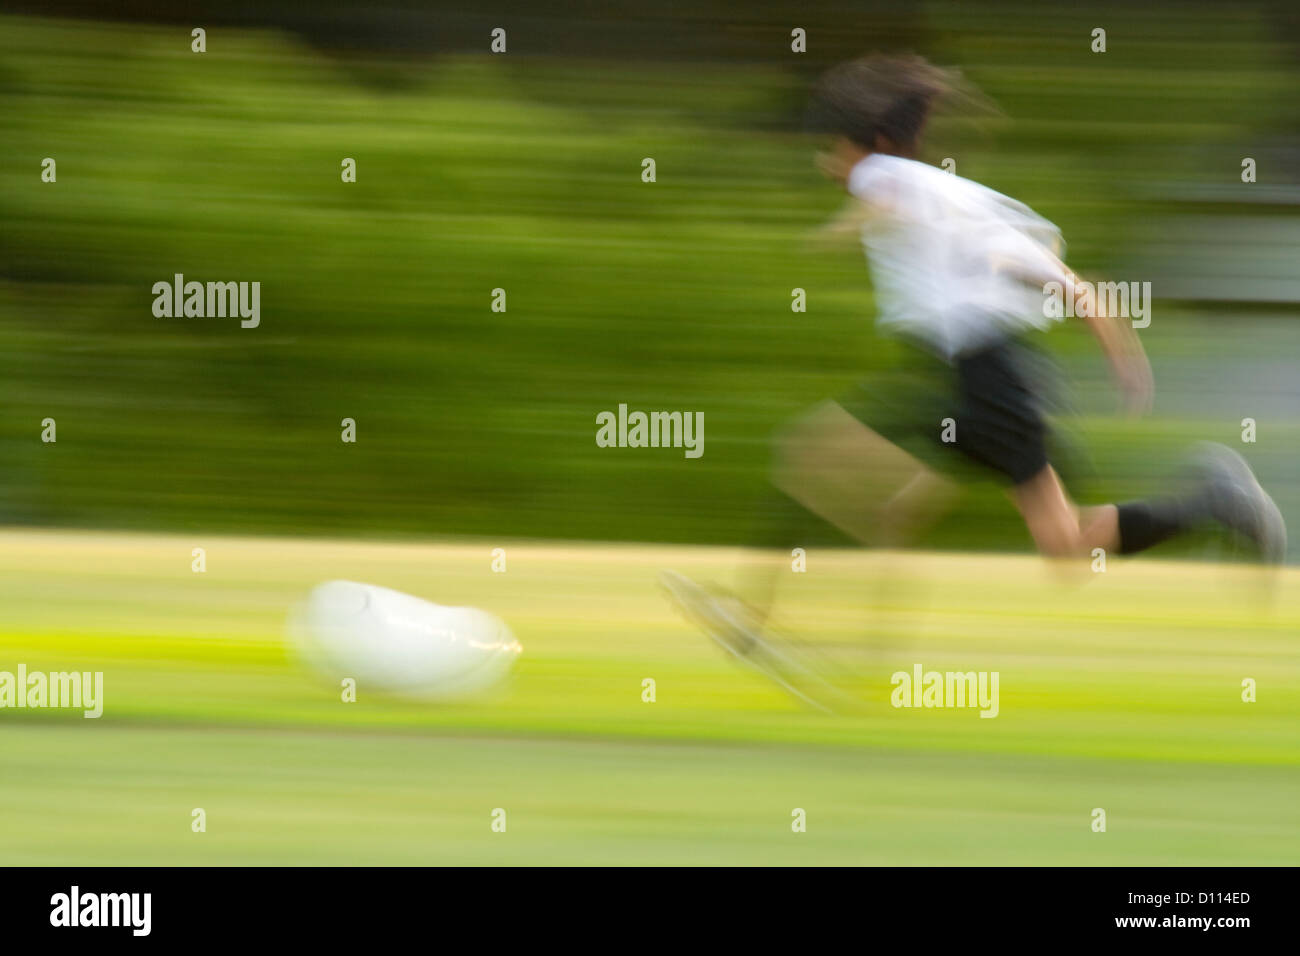 Blurred soccer player running with ball demonstrating the speed of the game. St Paul Minnesota MN USA Stock Photo